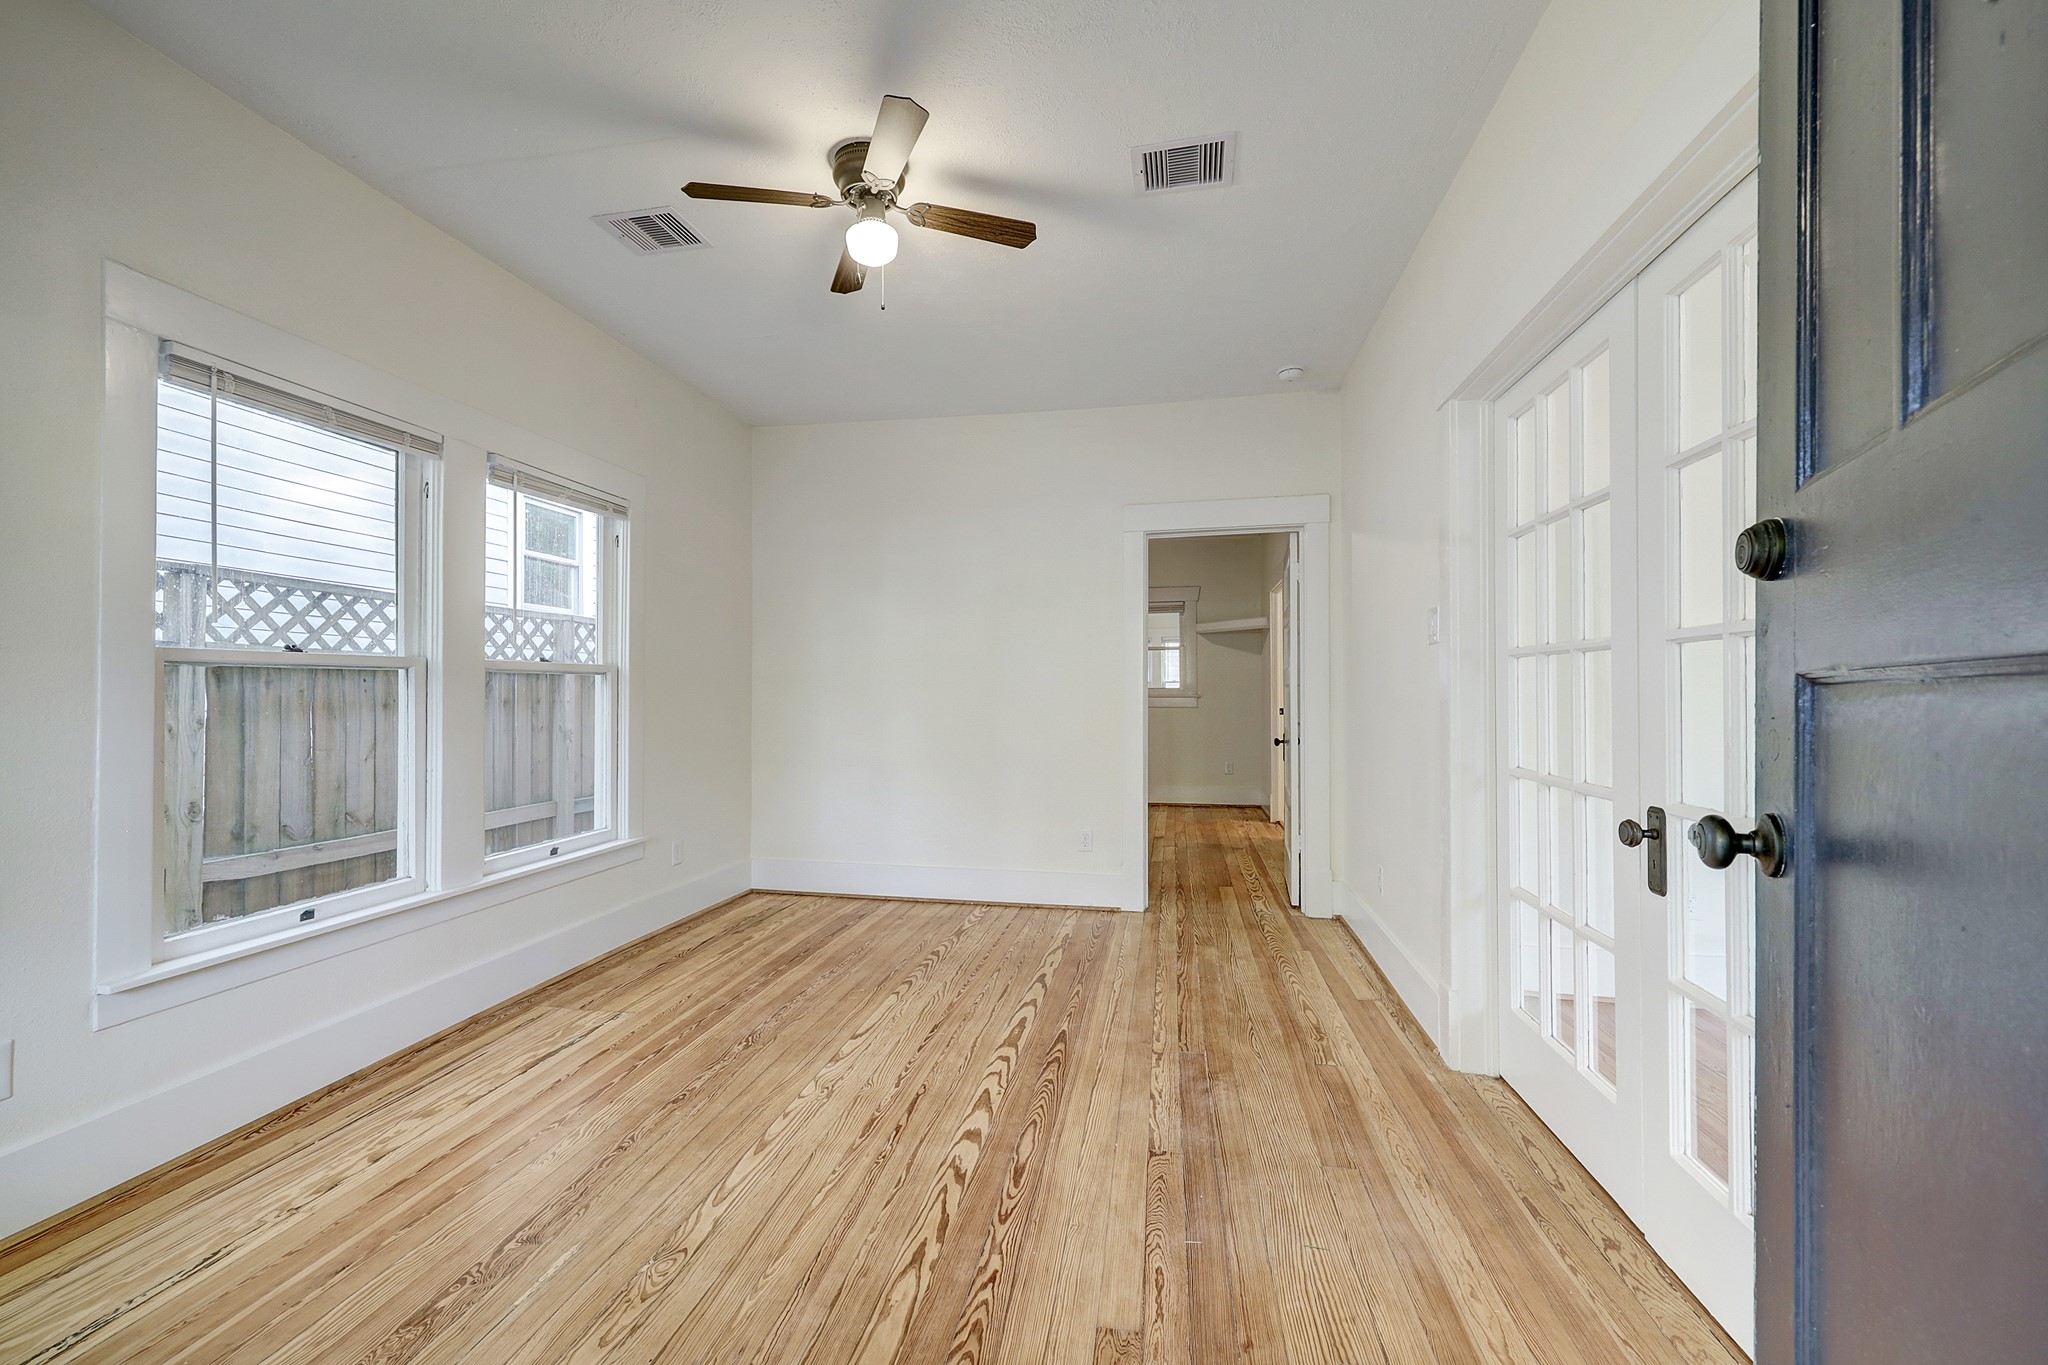 Completely restored original long leaf pine floors throughout house.  Note the antique French doors separating the living and dining spaces.